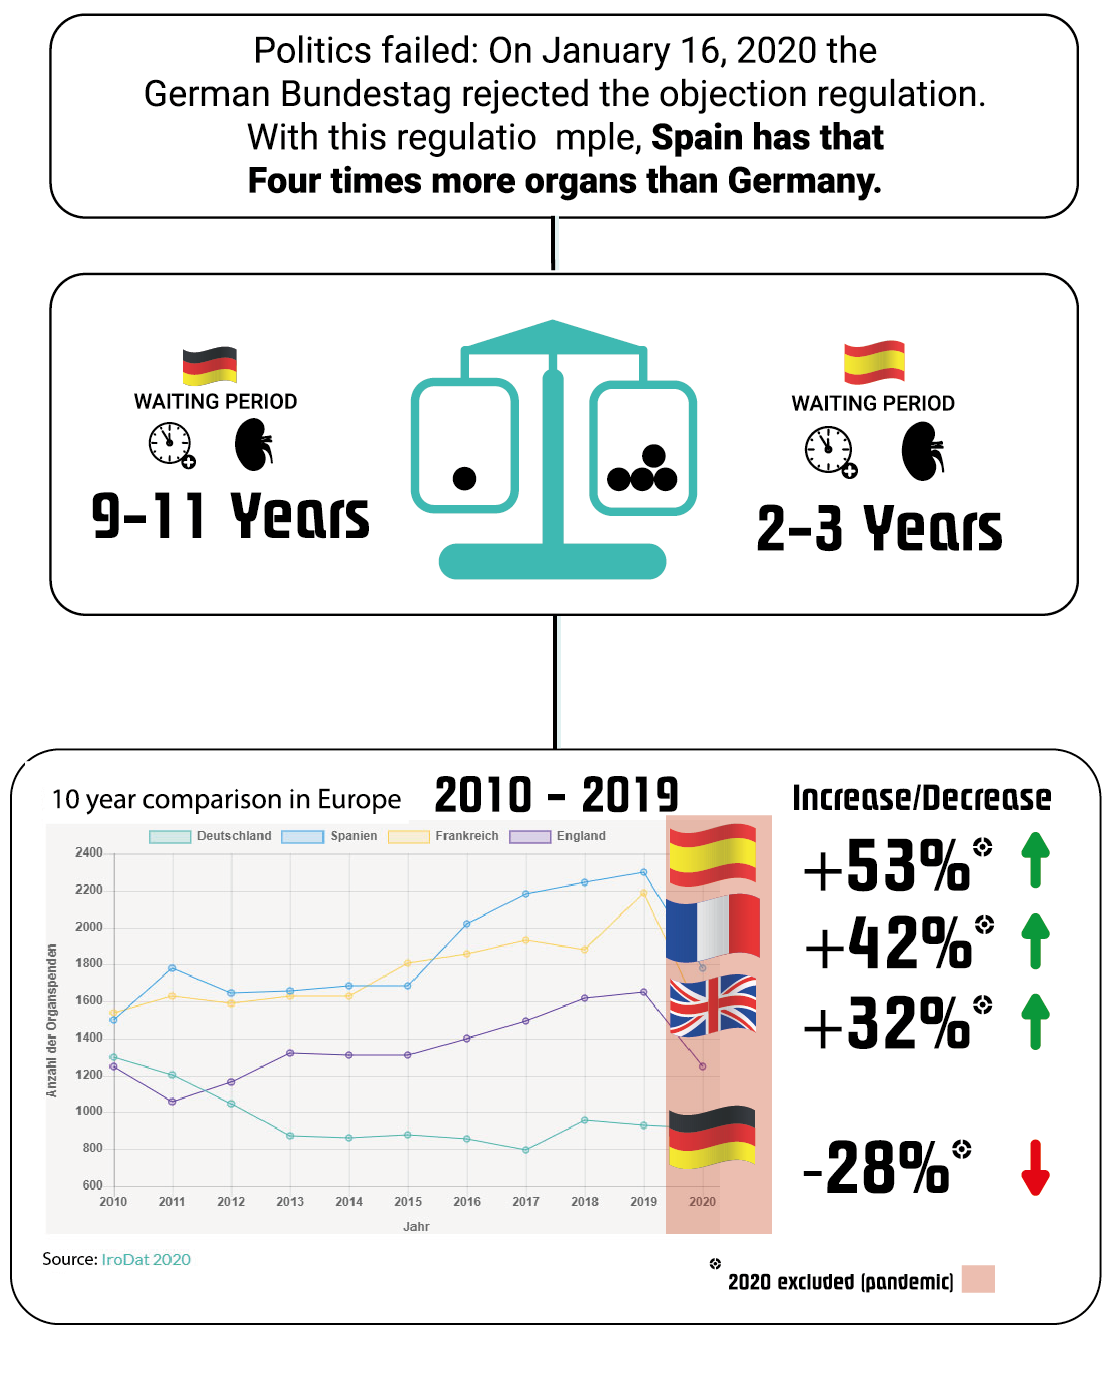 Politics has failed: On 16.01.2019, the German Bundestag rejected the OPT-IN regulation. With this regulation, e.g. Spain has 4 times more supply of organs than Germany.